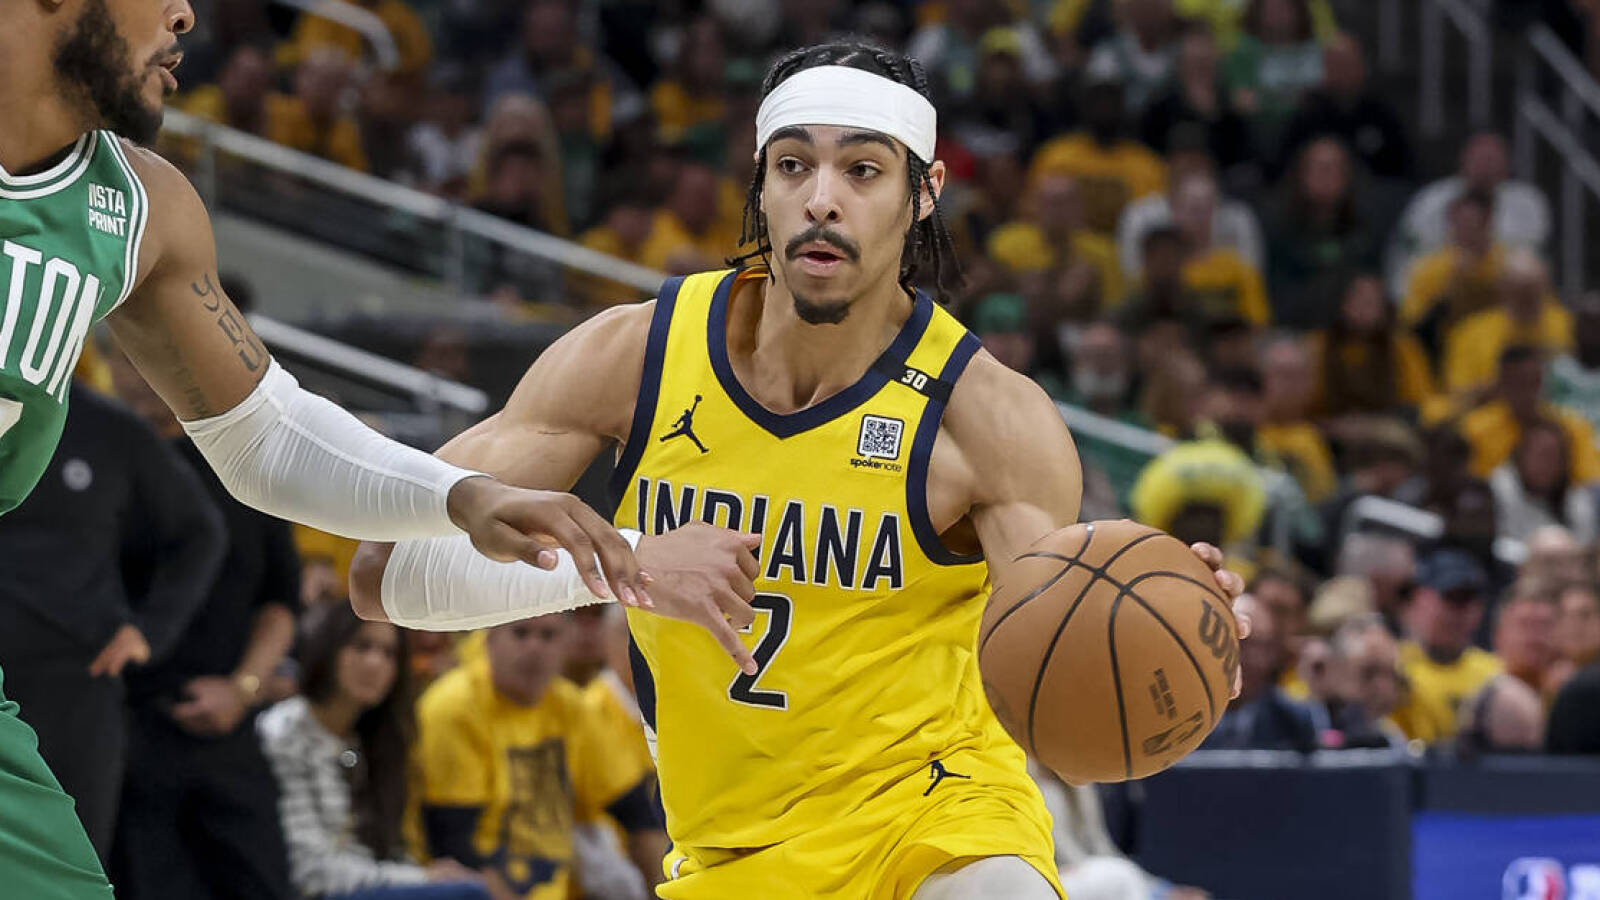 Watch: Pacers' Andrew Nembhard beats the buzzer in first half of Game 4